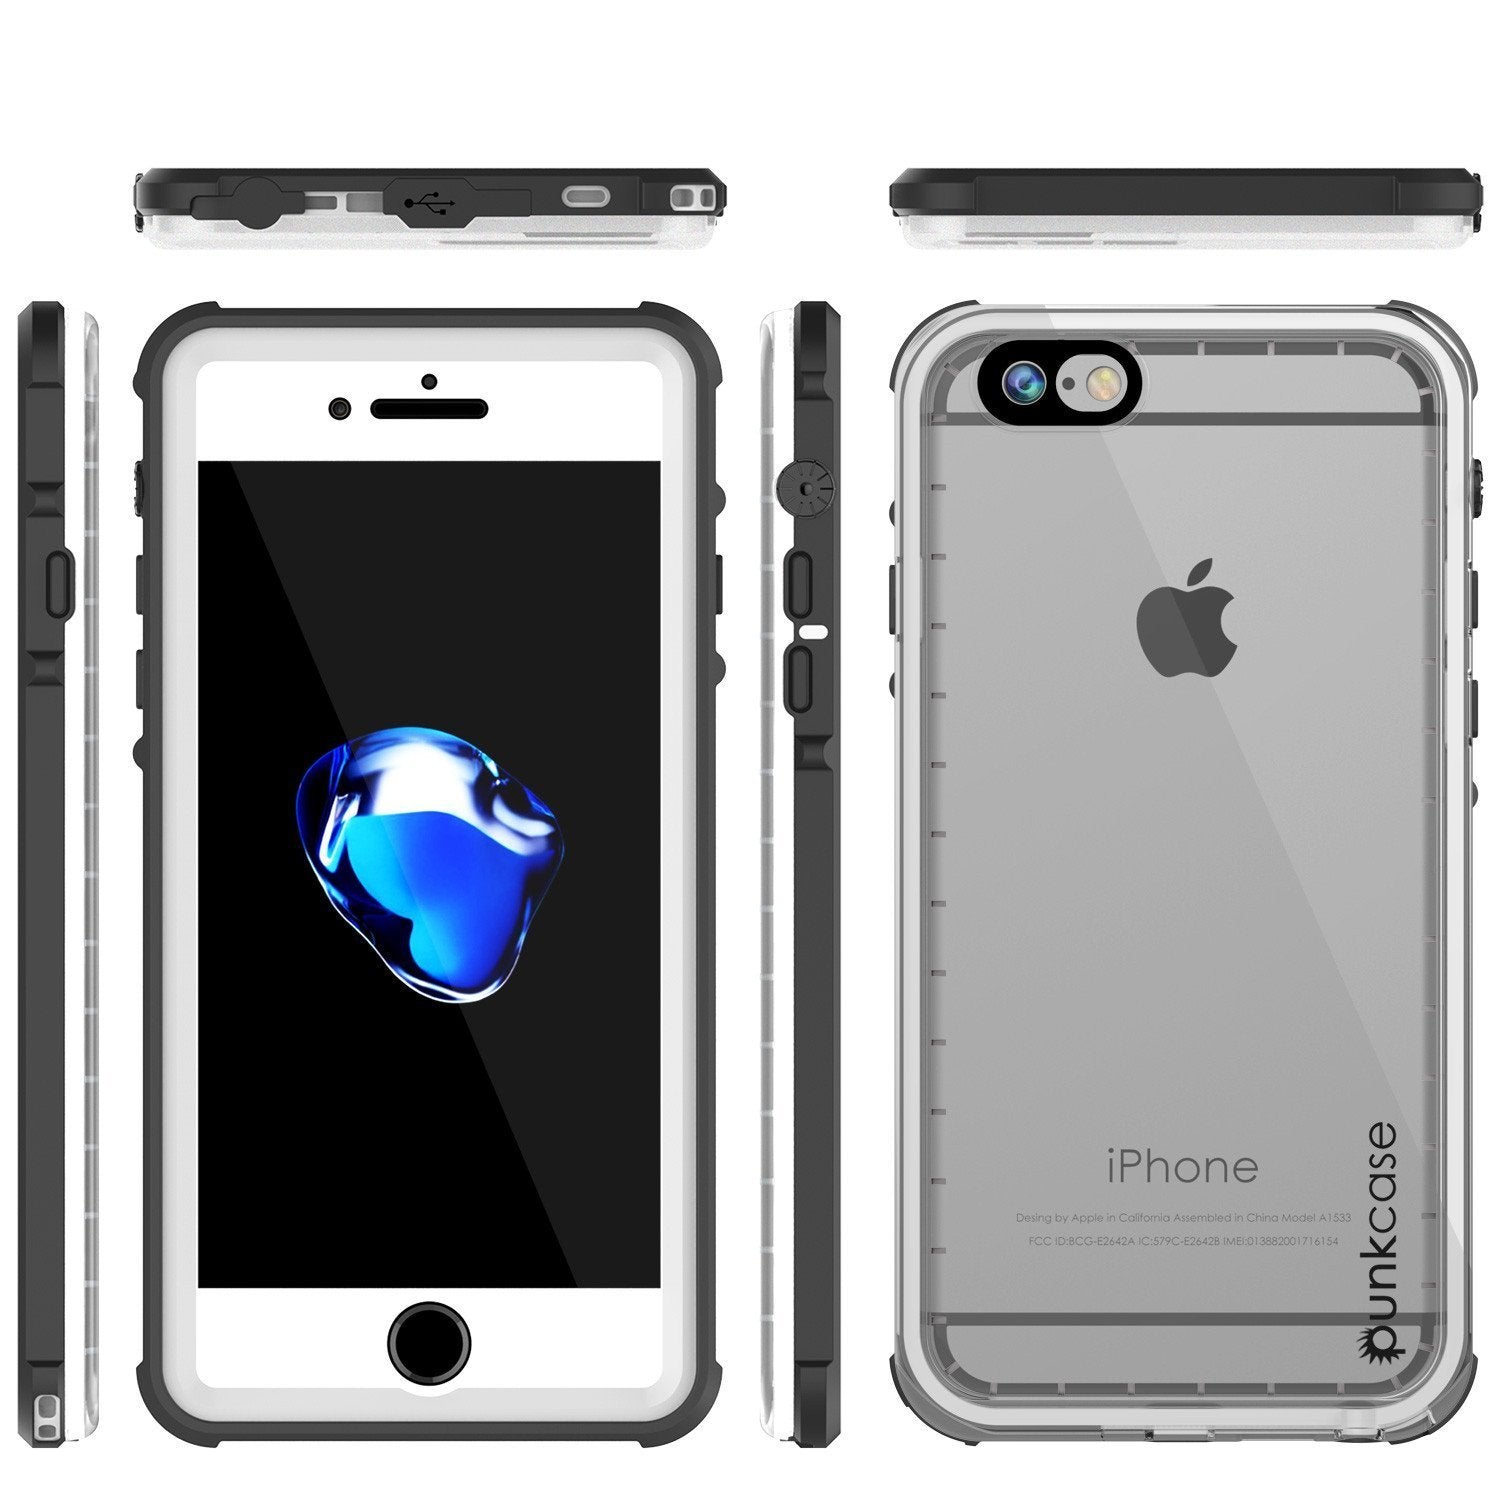 Apple iPhone SE (4.7") Waterproof Case, PUNKcase CRYSTAL White W/ Attached Screen Protector  | Warranty